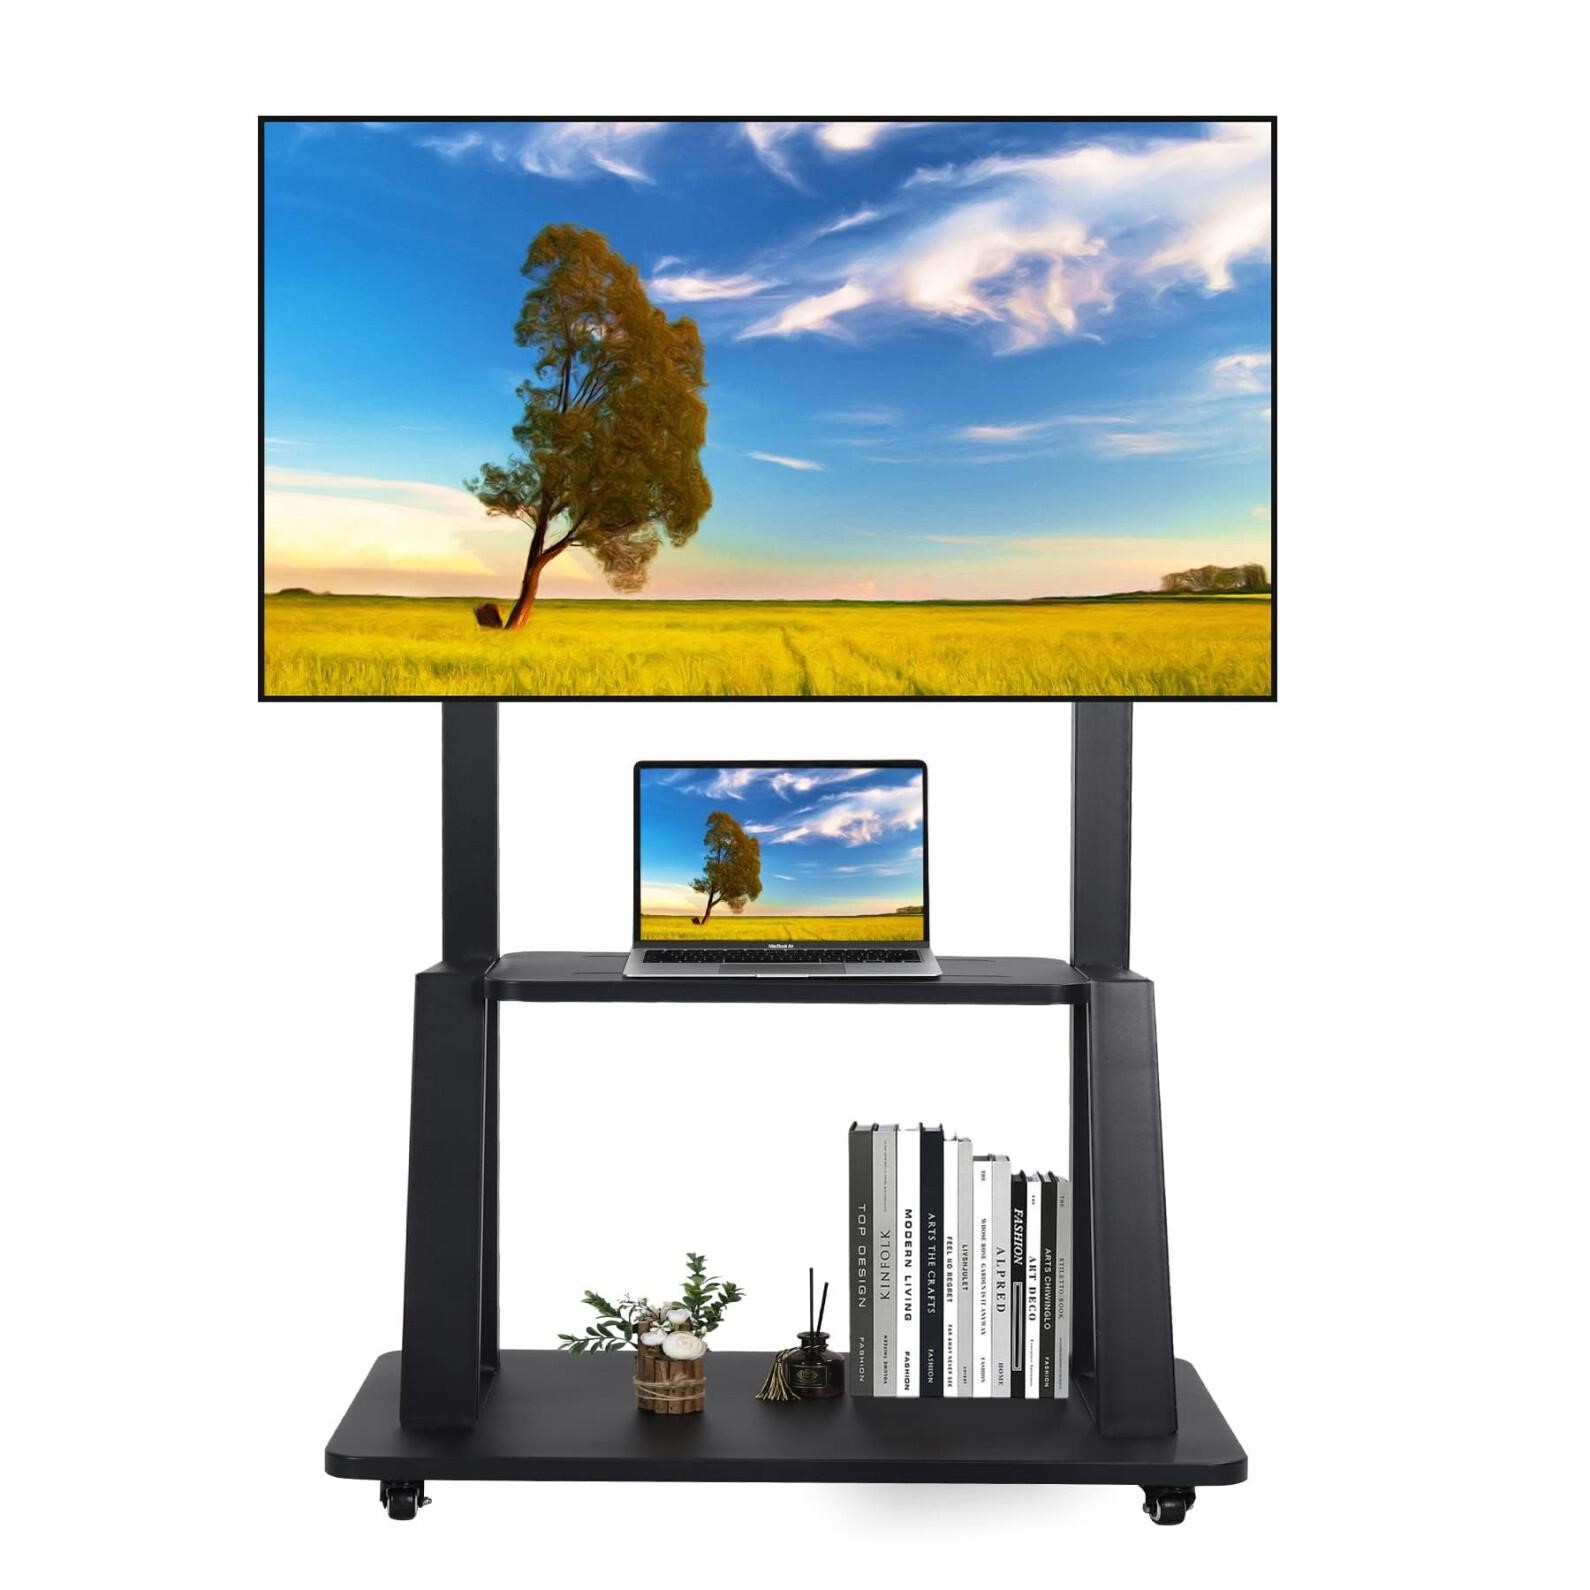 Maiproo Mobile TV Cart Rolling Floor Stand for 32-